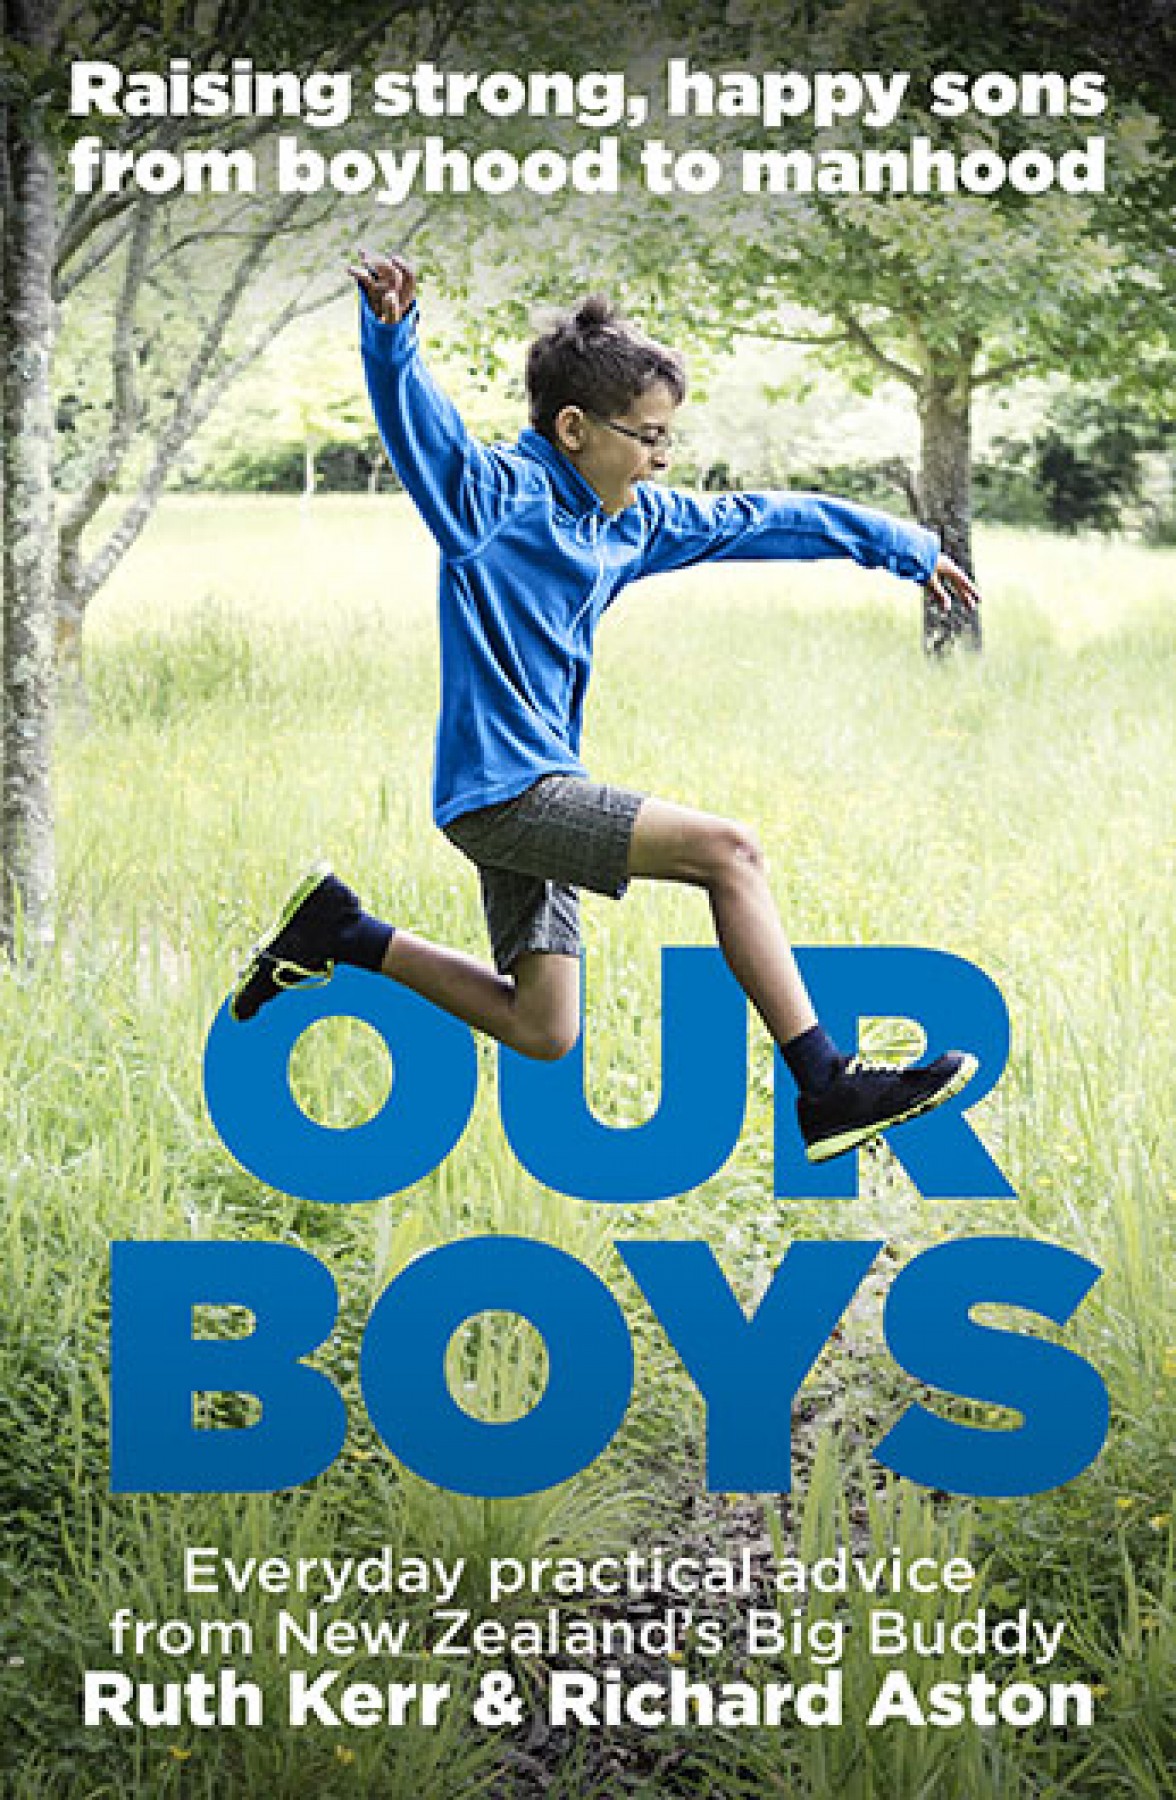 Our boys: Raising strong, happy sons from boyhood to manhood